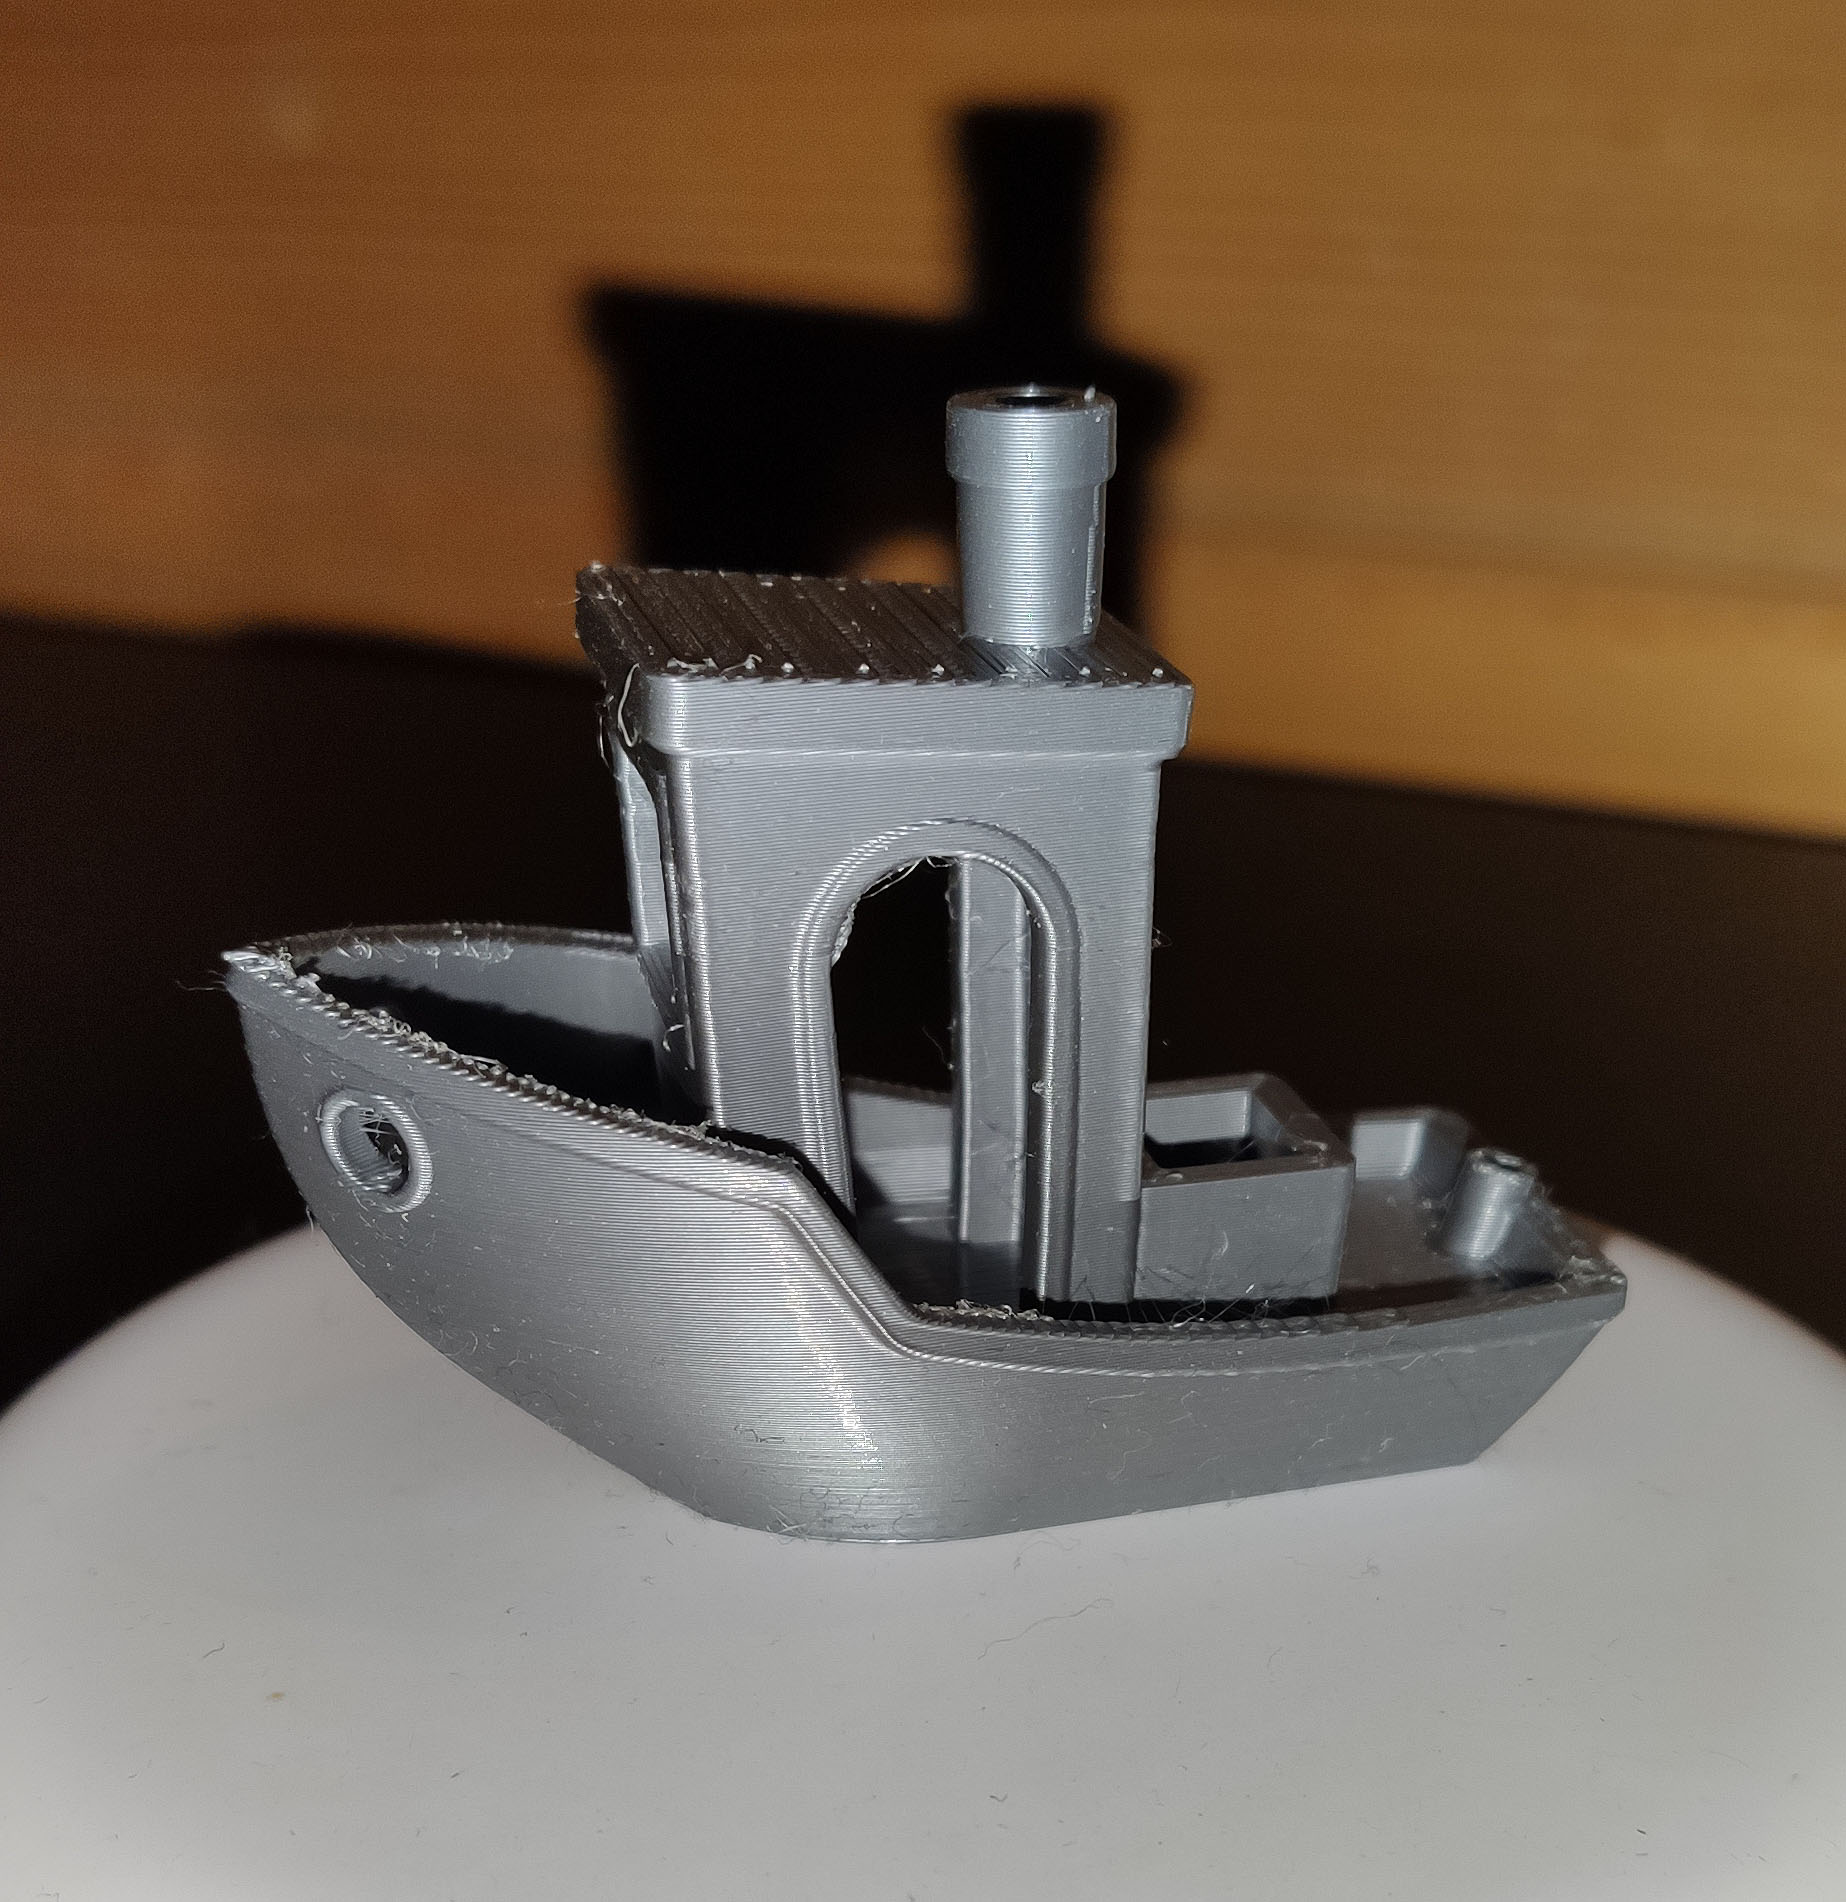 First Layer Issues - Troubleshooting - V1 Engineering Forum